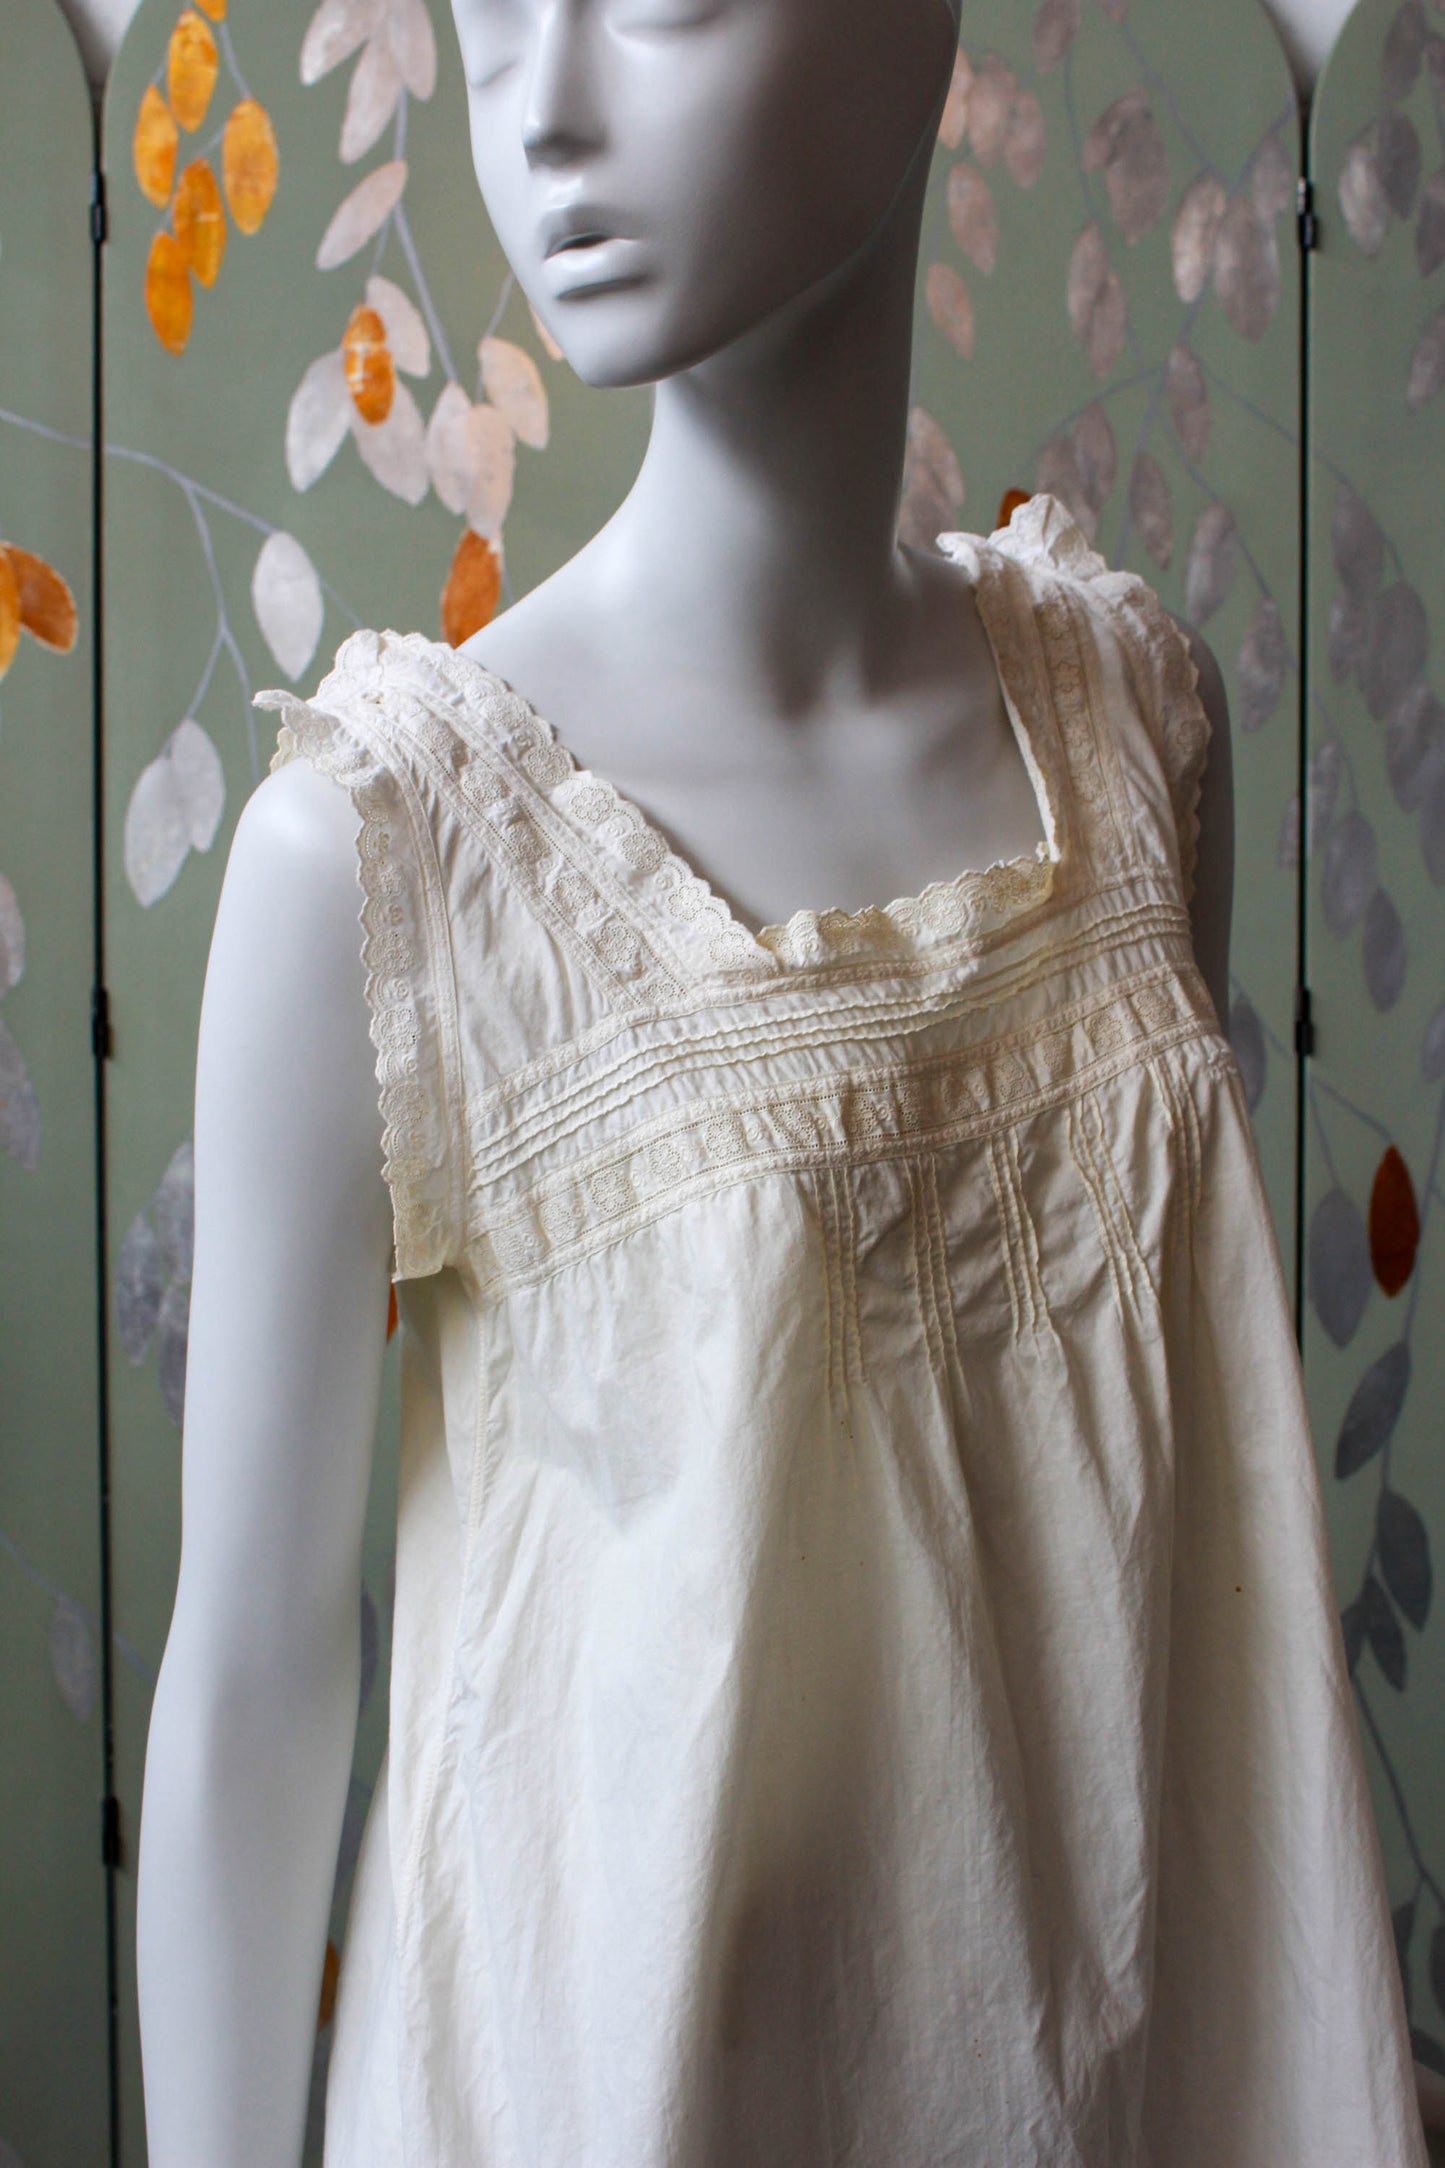 Antique White Cotton Nightgown with Daisy Eyelet Trim, Large